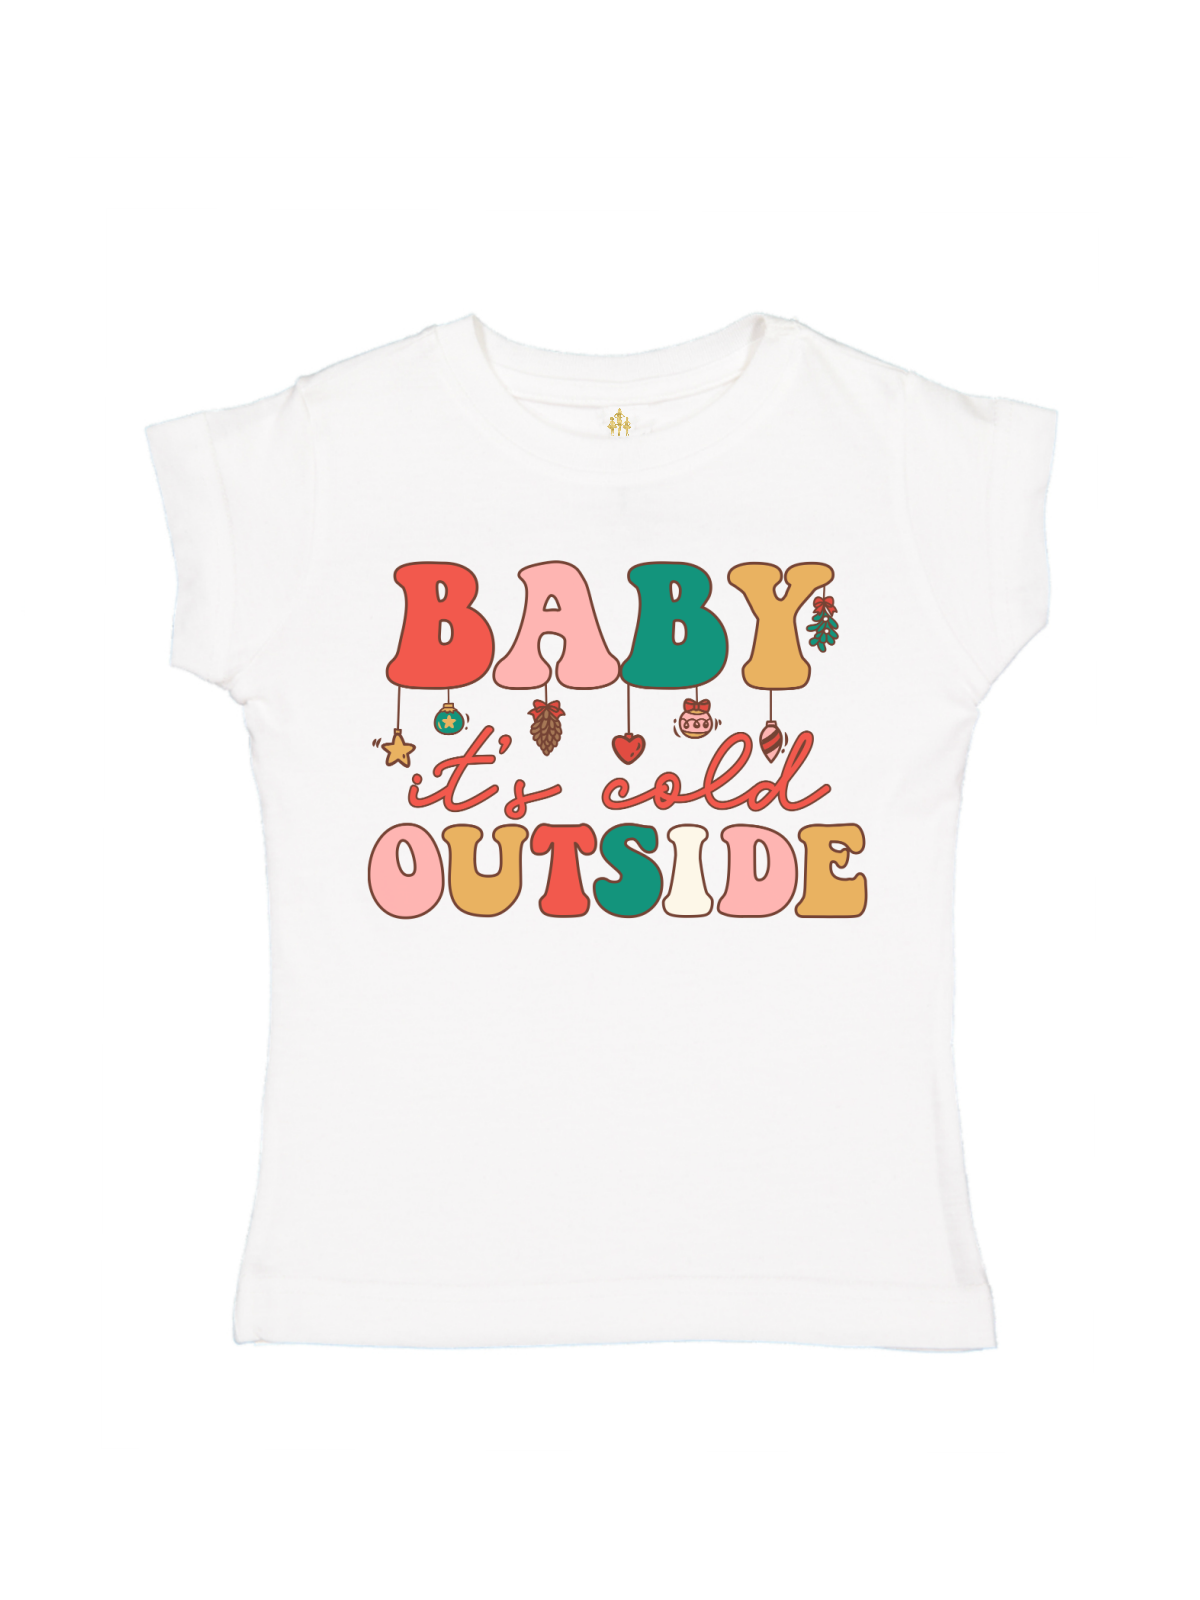 Baby It's Cold Outside Girls Christmas Shirt - Long SLeeve